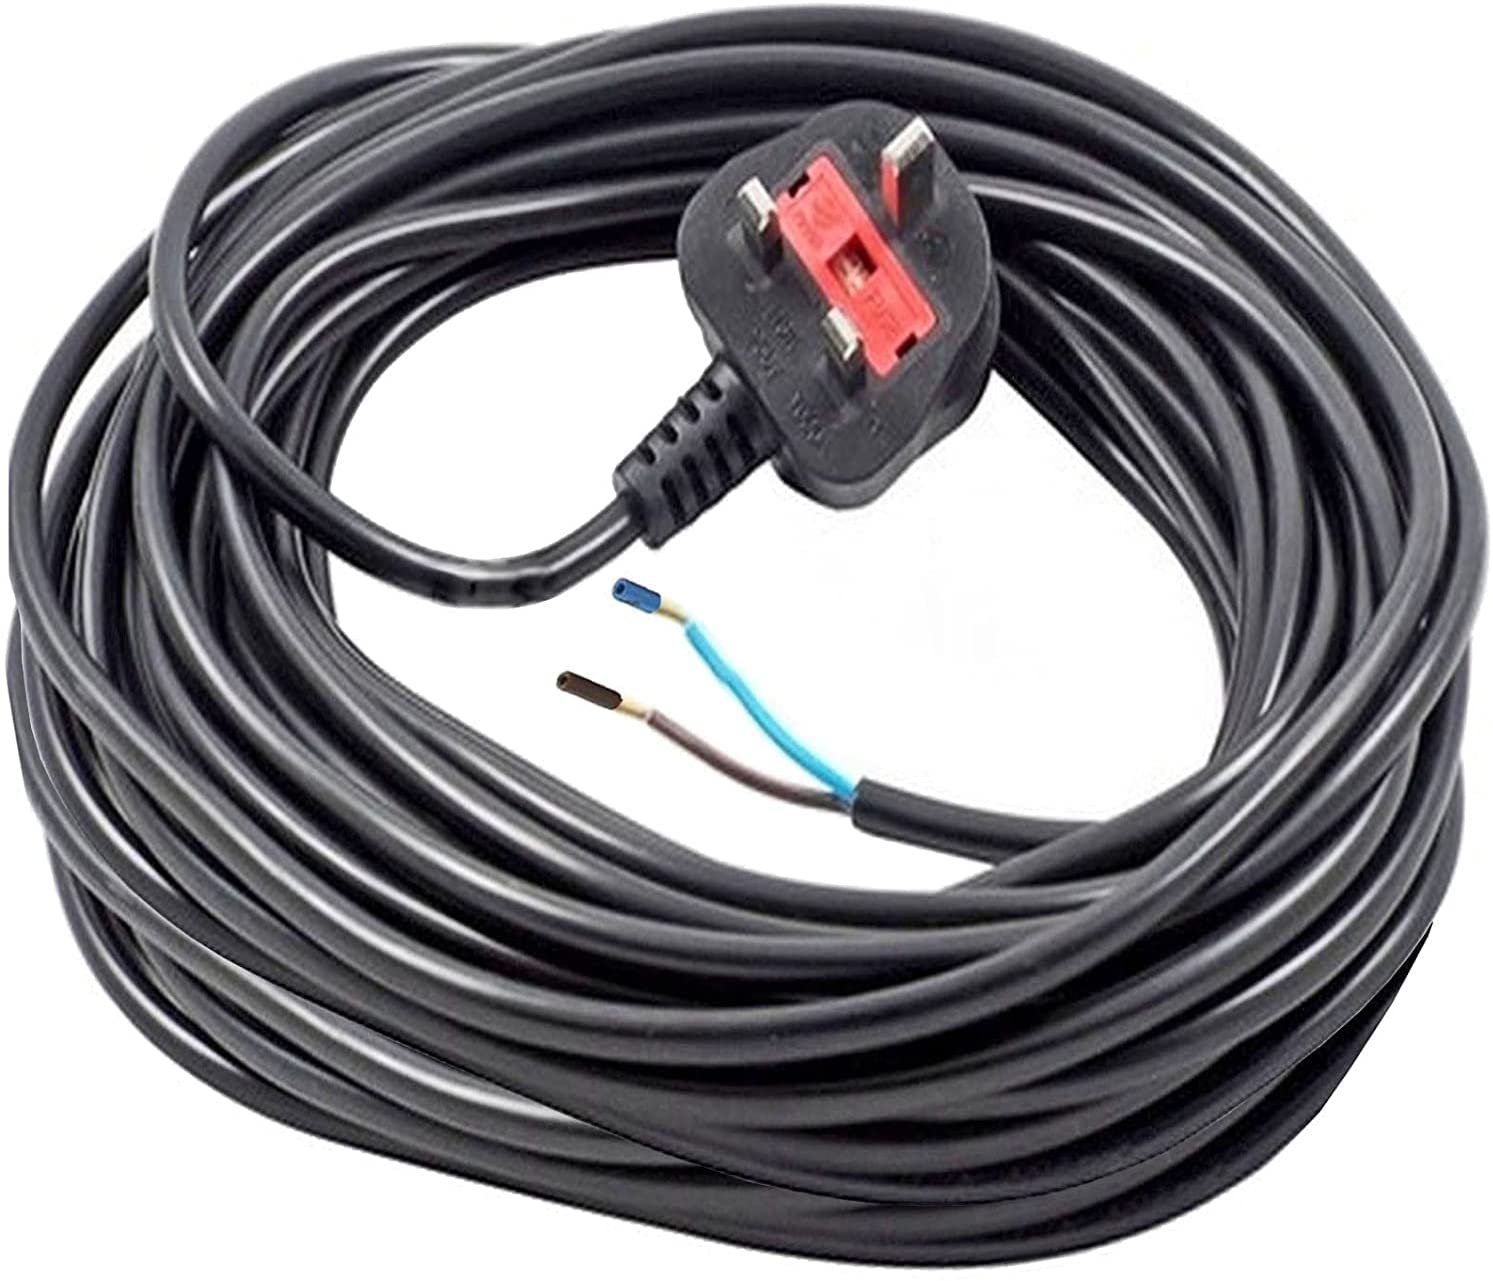 XL Extra Long 12M Metre Black Cable Mains Power Lead for Vax Vacuum Cleaner (UK Plug)